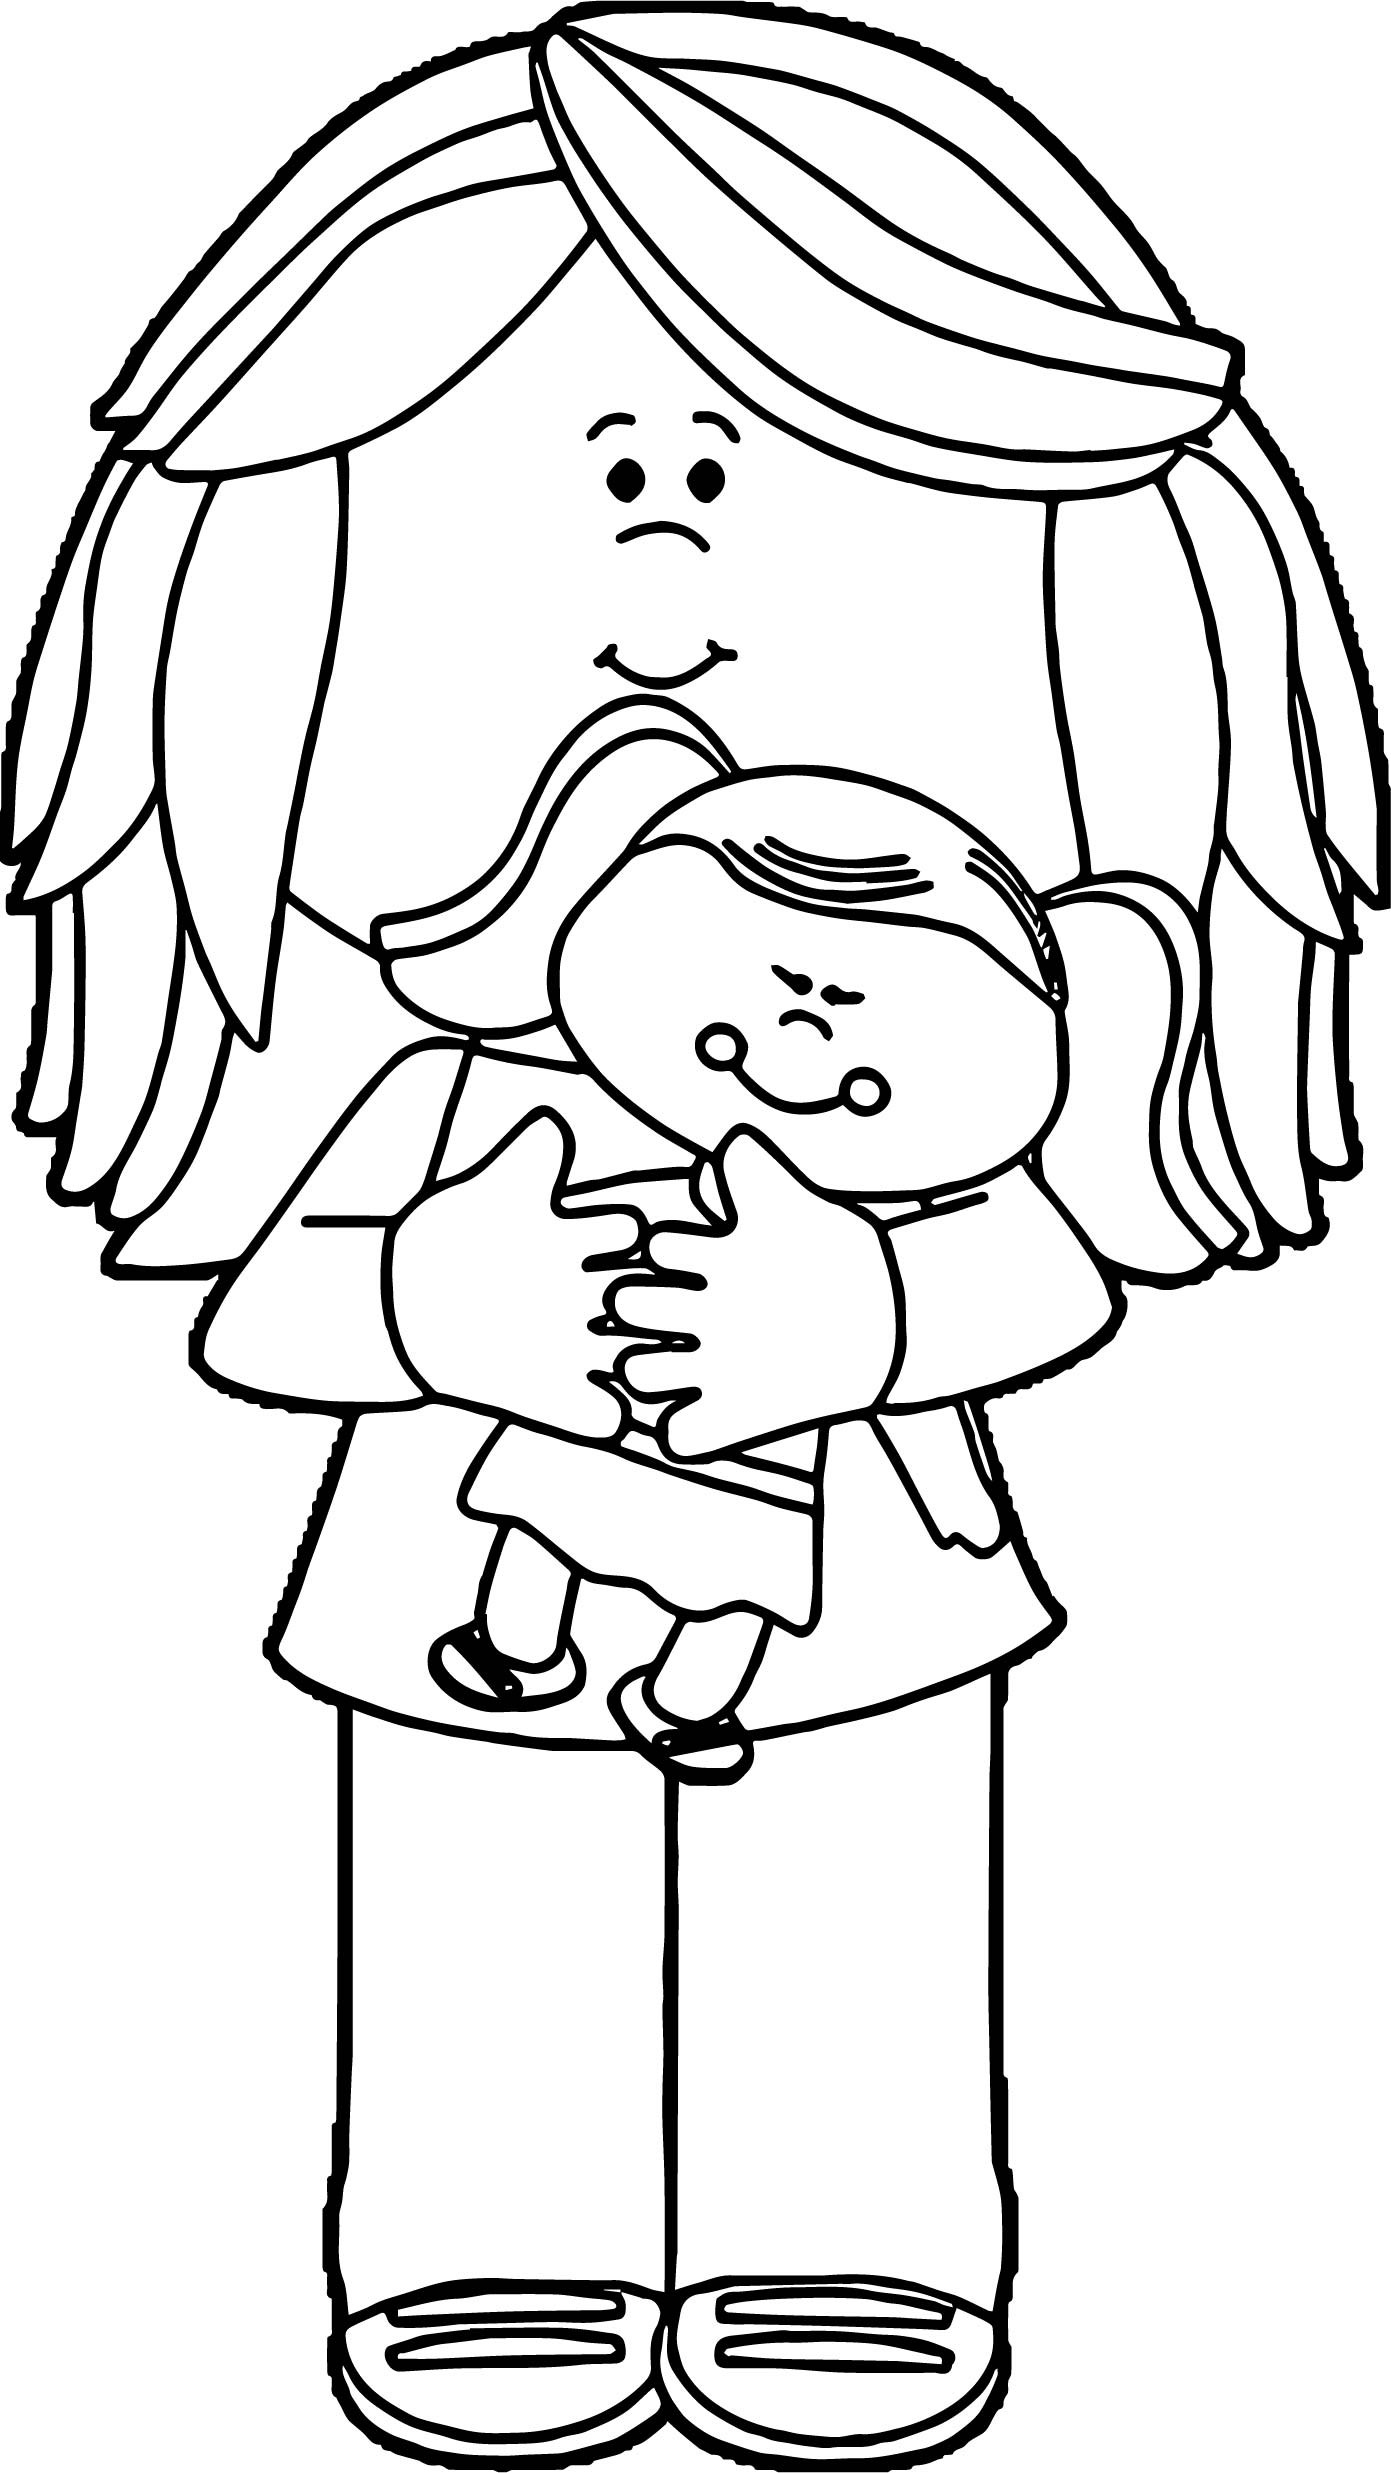 Baby Doll Coloring Page
 Little Girl Holding Baby Doll Coloring Page